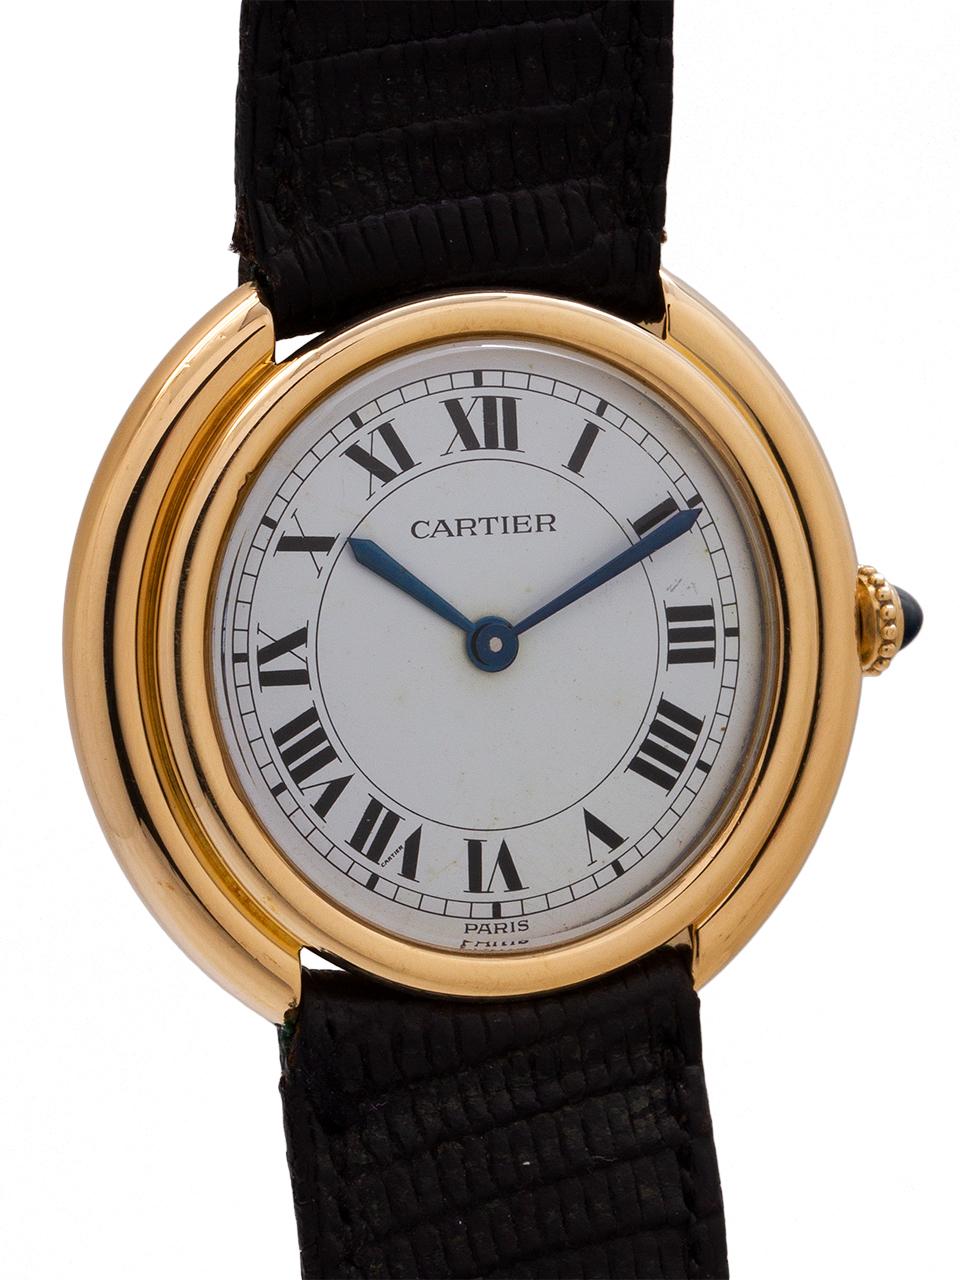 Men's Cartier 18K gold “Vendome tank” circa 1970’s. Featuring a 27 x 32mm round case with rounded stepped case design. Featuring white gloss dial with classic Cartier Roman figures, blued steel hands, and powered by 17 jewel manual wind movement